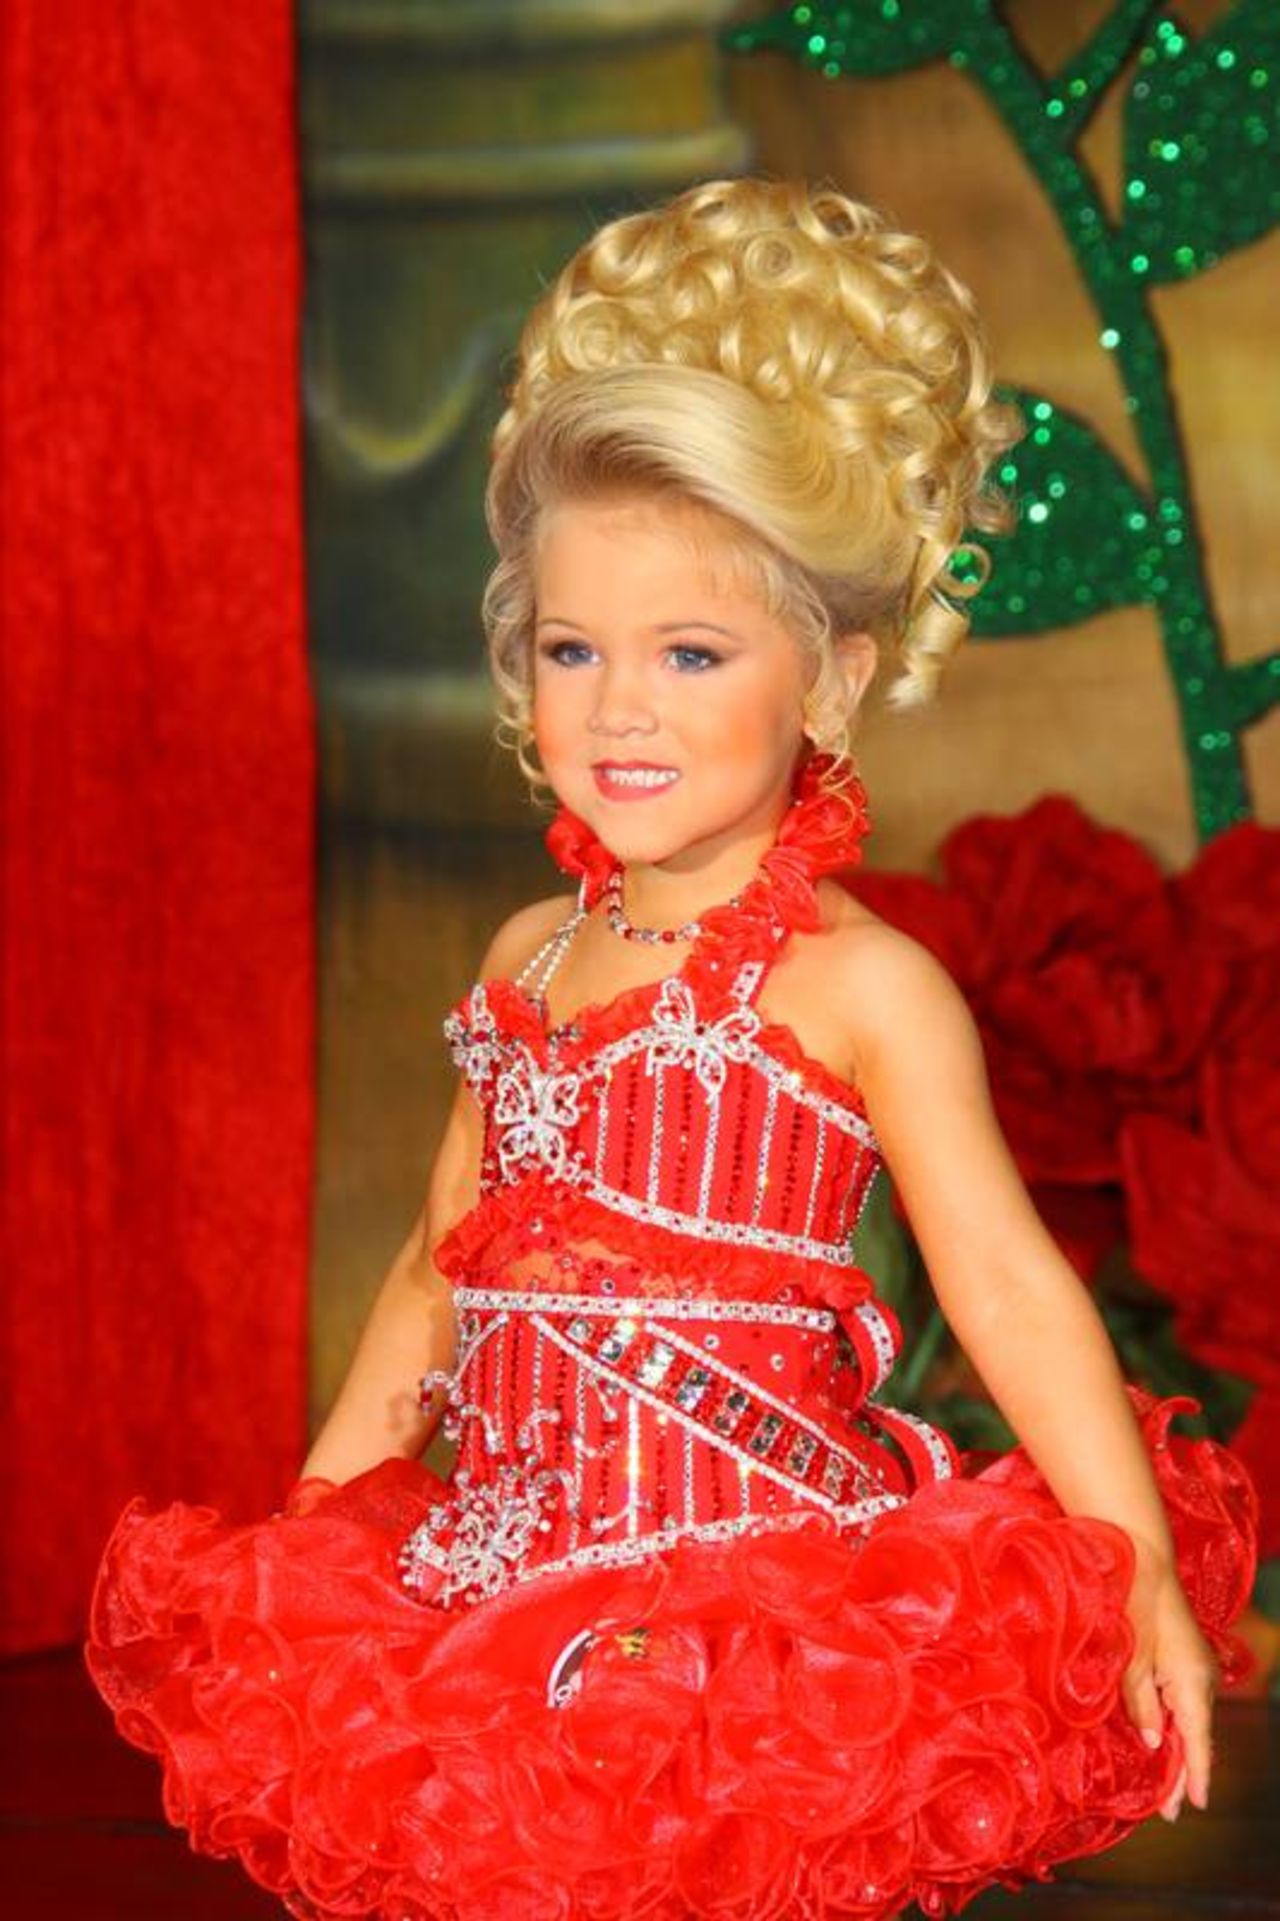 On the opposite side of the spectrum, oversexified clothing for toddlers and little girls ran rampant. Like this costume from the TLC show, "Toddlers and Tiaras," sexy Halloween costumes for kids was a point of contention, <a href="http://www.cnn.com/2011/10/28/living/sexy-costumes-kids/index.html" target="_blank">as we reported this year</a>.